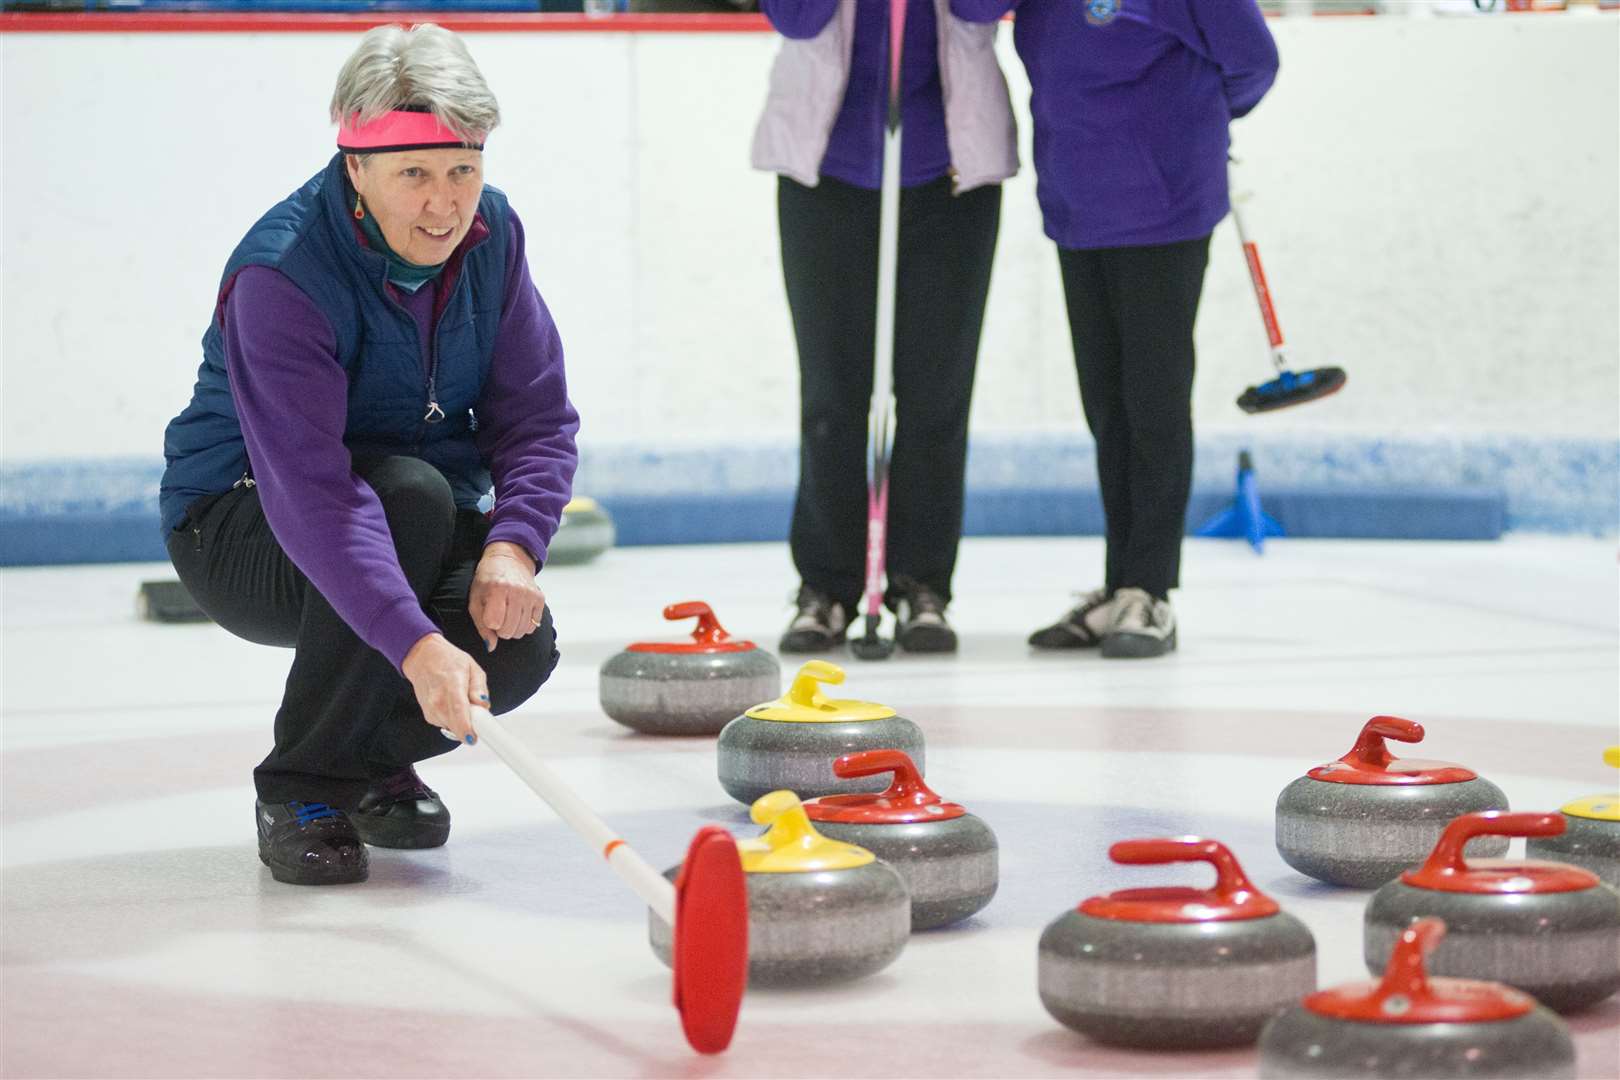 Moray Province Curling season returns from October holiday break with matches at Moray Leisure Centre in Elgin